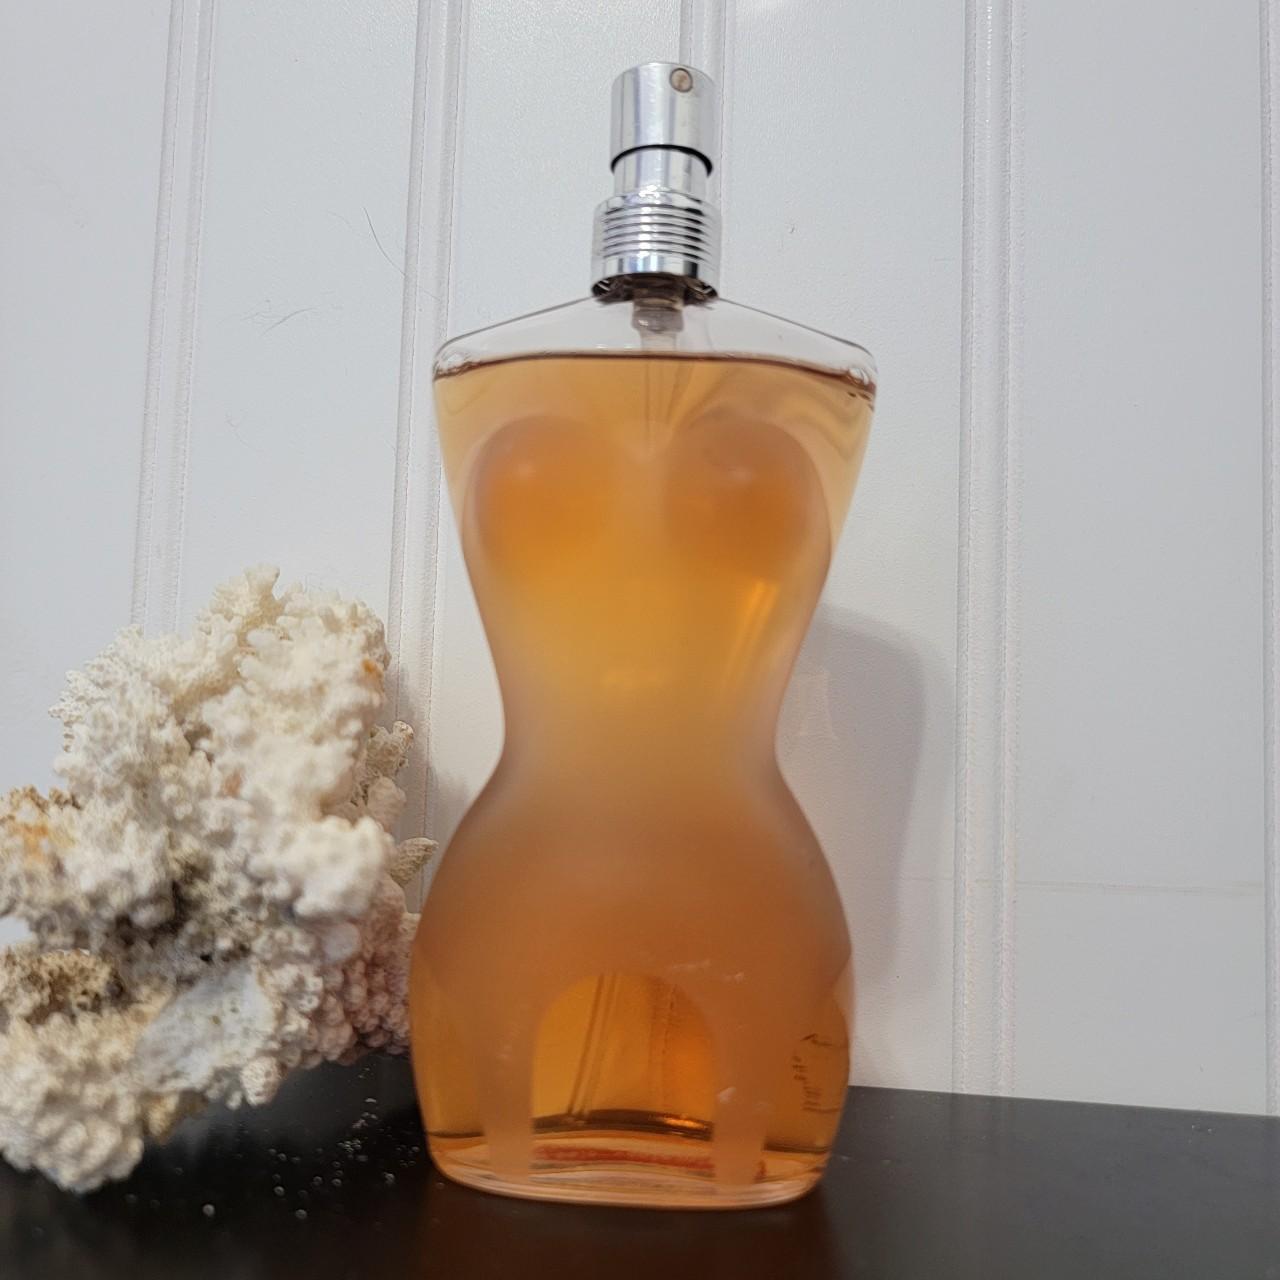 Jean-Paul Gaultier Silver and Gold Fragrance | Depop